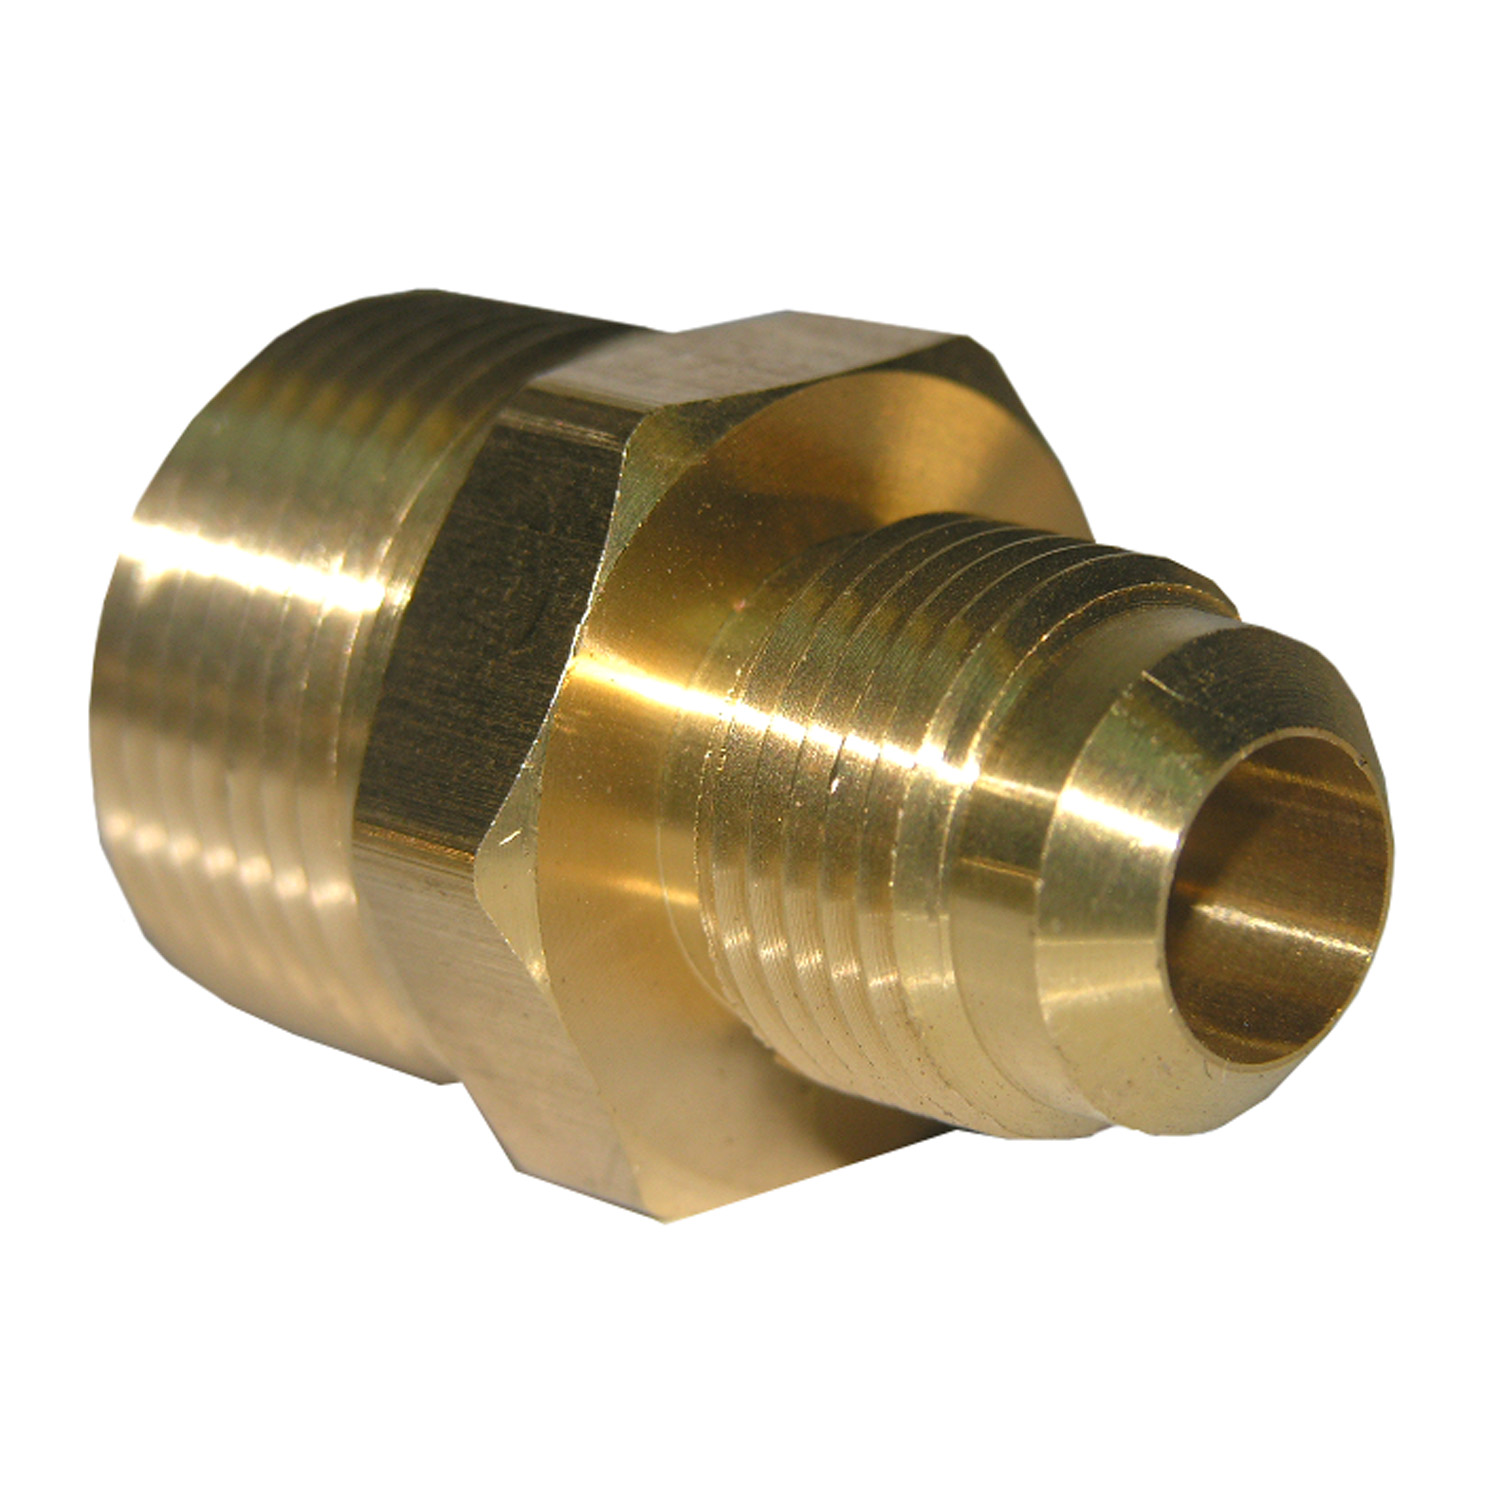 17-4851 Pipe Adapter, 1/2 x 3/4 in, Male Flare x MPT, Brass, 700 psi Pressure